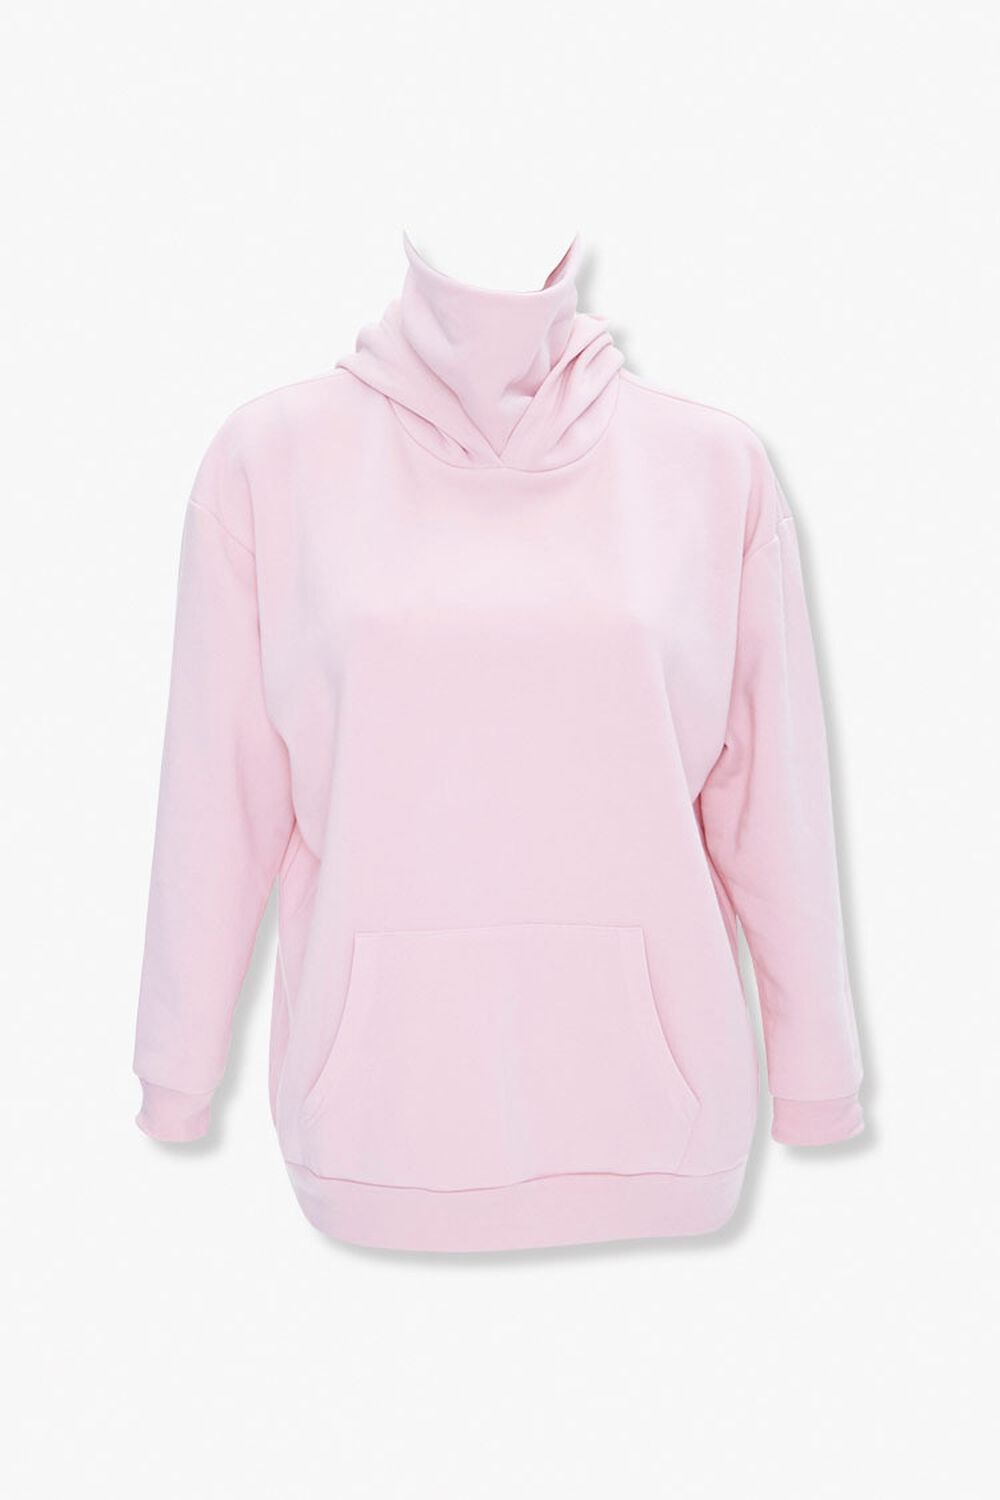 LIGHT PINK Plus Size Face Mask Hoodie, image 1